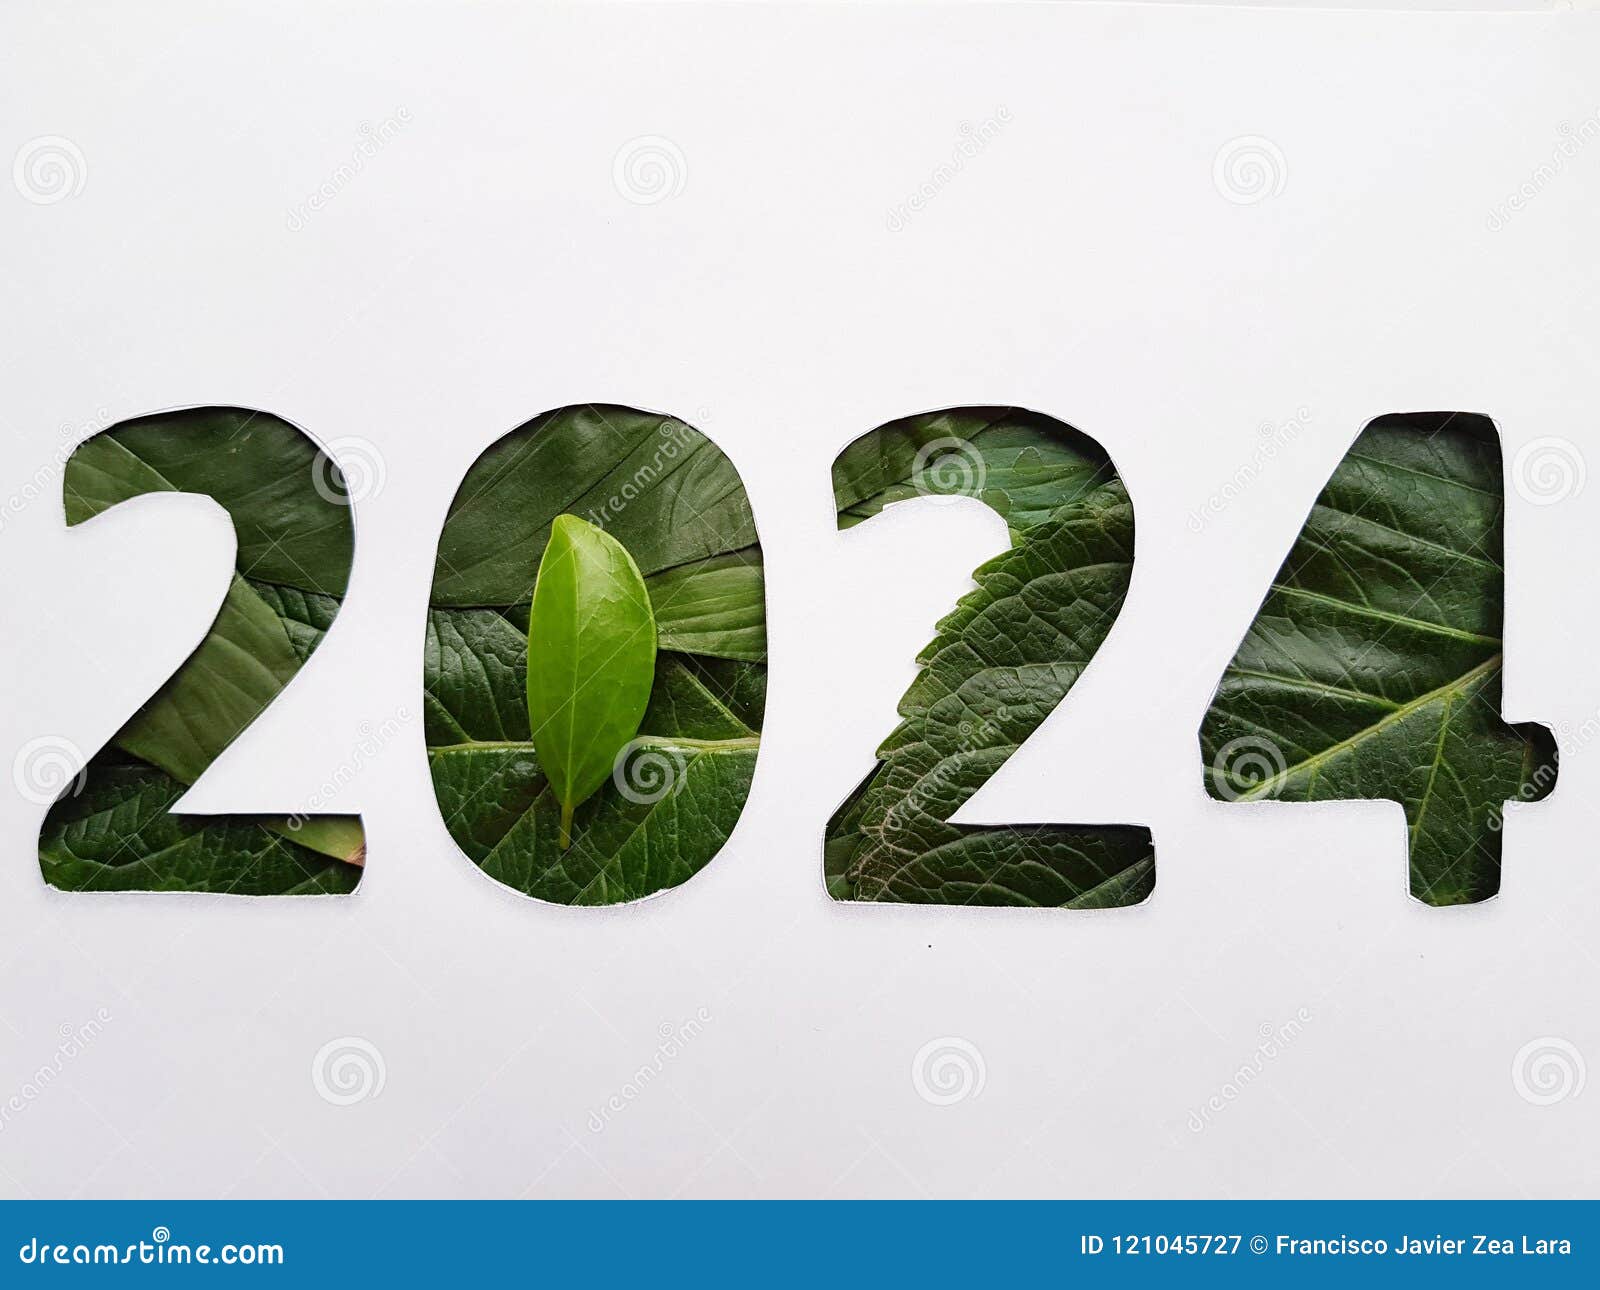 Backdrop Environmental New Year Ads Ecology Ecosystem Care Green Leaves Foliage Number Green Leaf Texture 121045727 